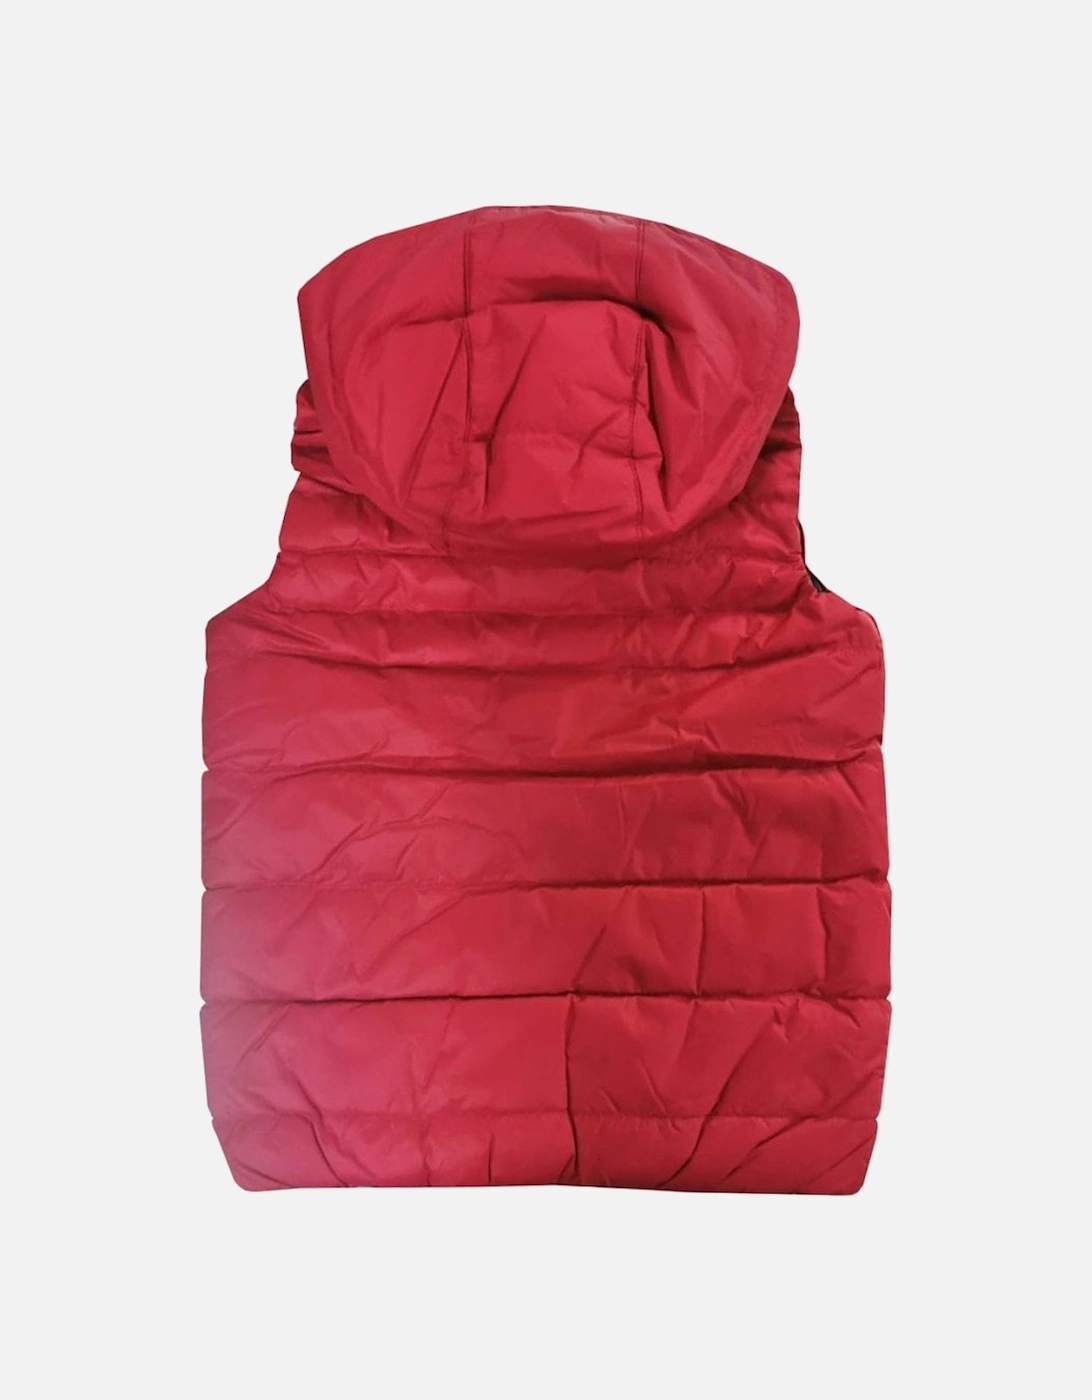 Boy's Reversible Red And Black Gilet.